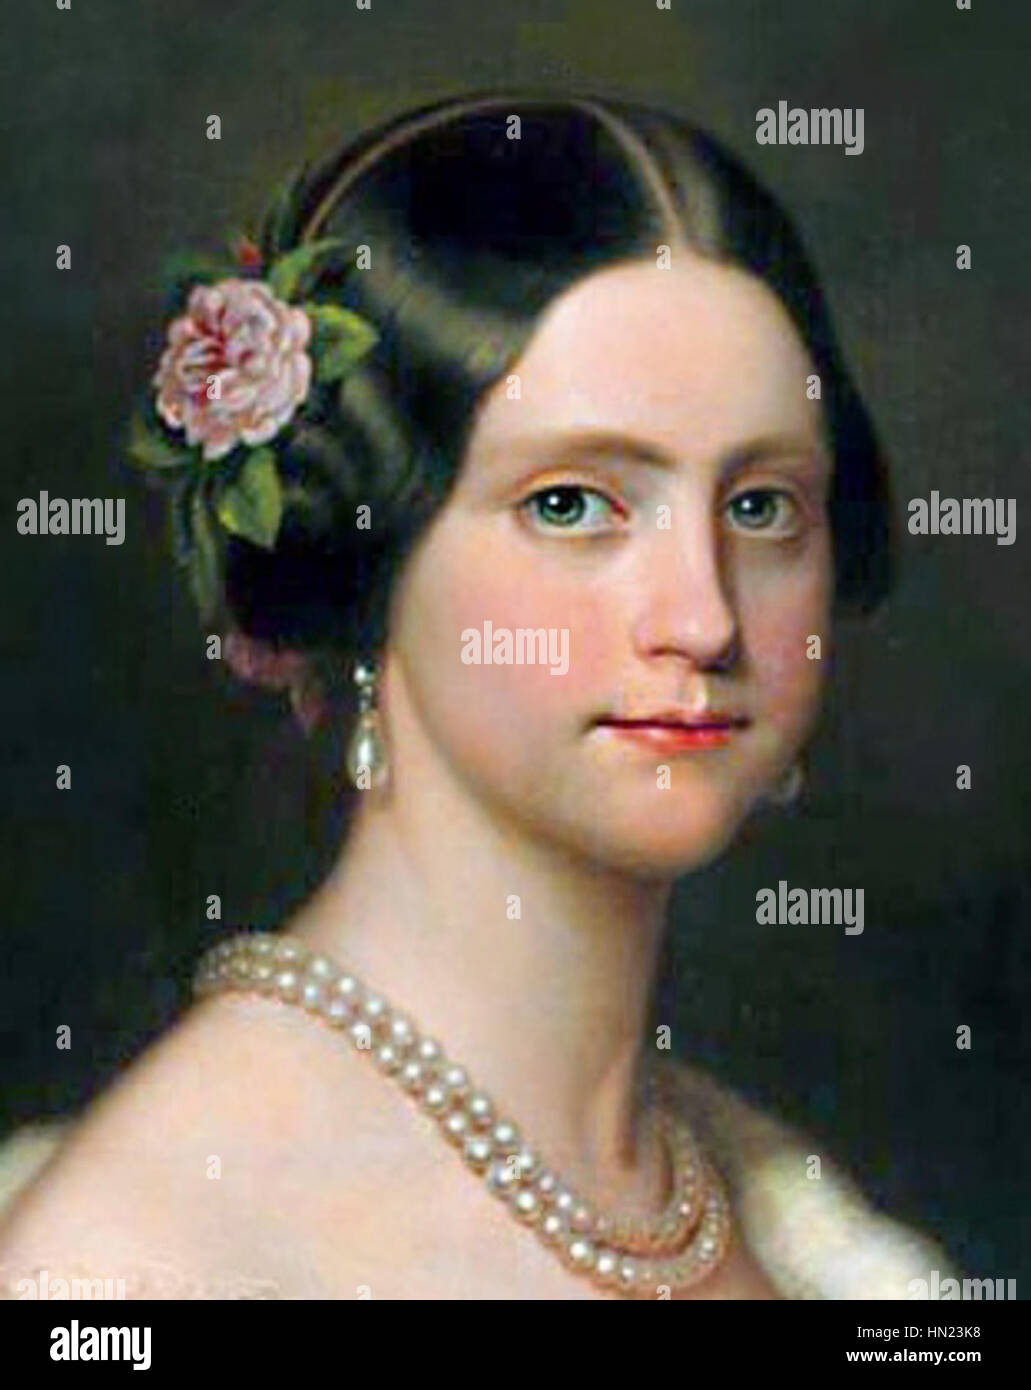 Maria Amelia High Resolution Stock Photography and Images - Alamy